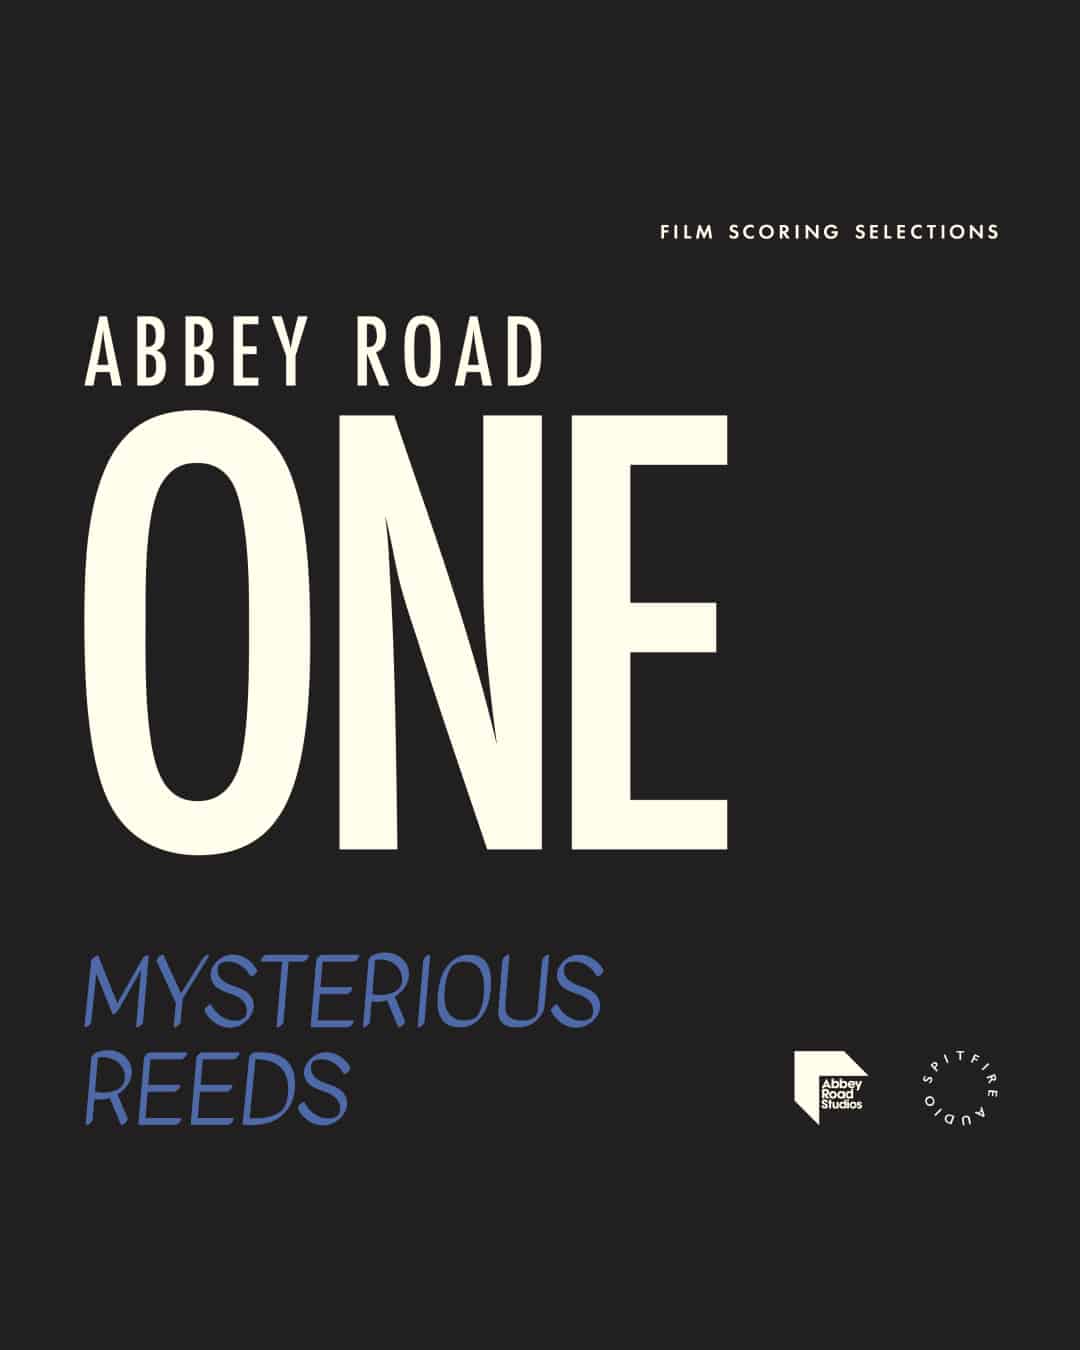 ABBEY ROAD ONE: MYSTERIOUS REEDS – Evoke a Magical and Mysterious Air in Your Compositions!